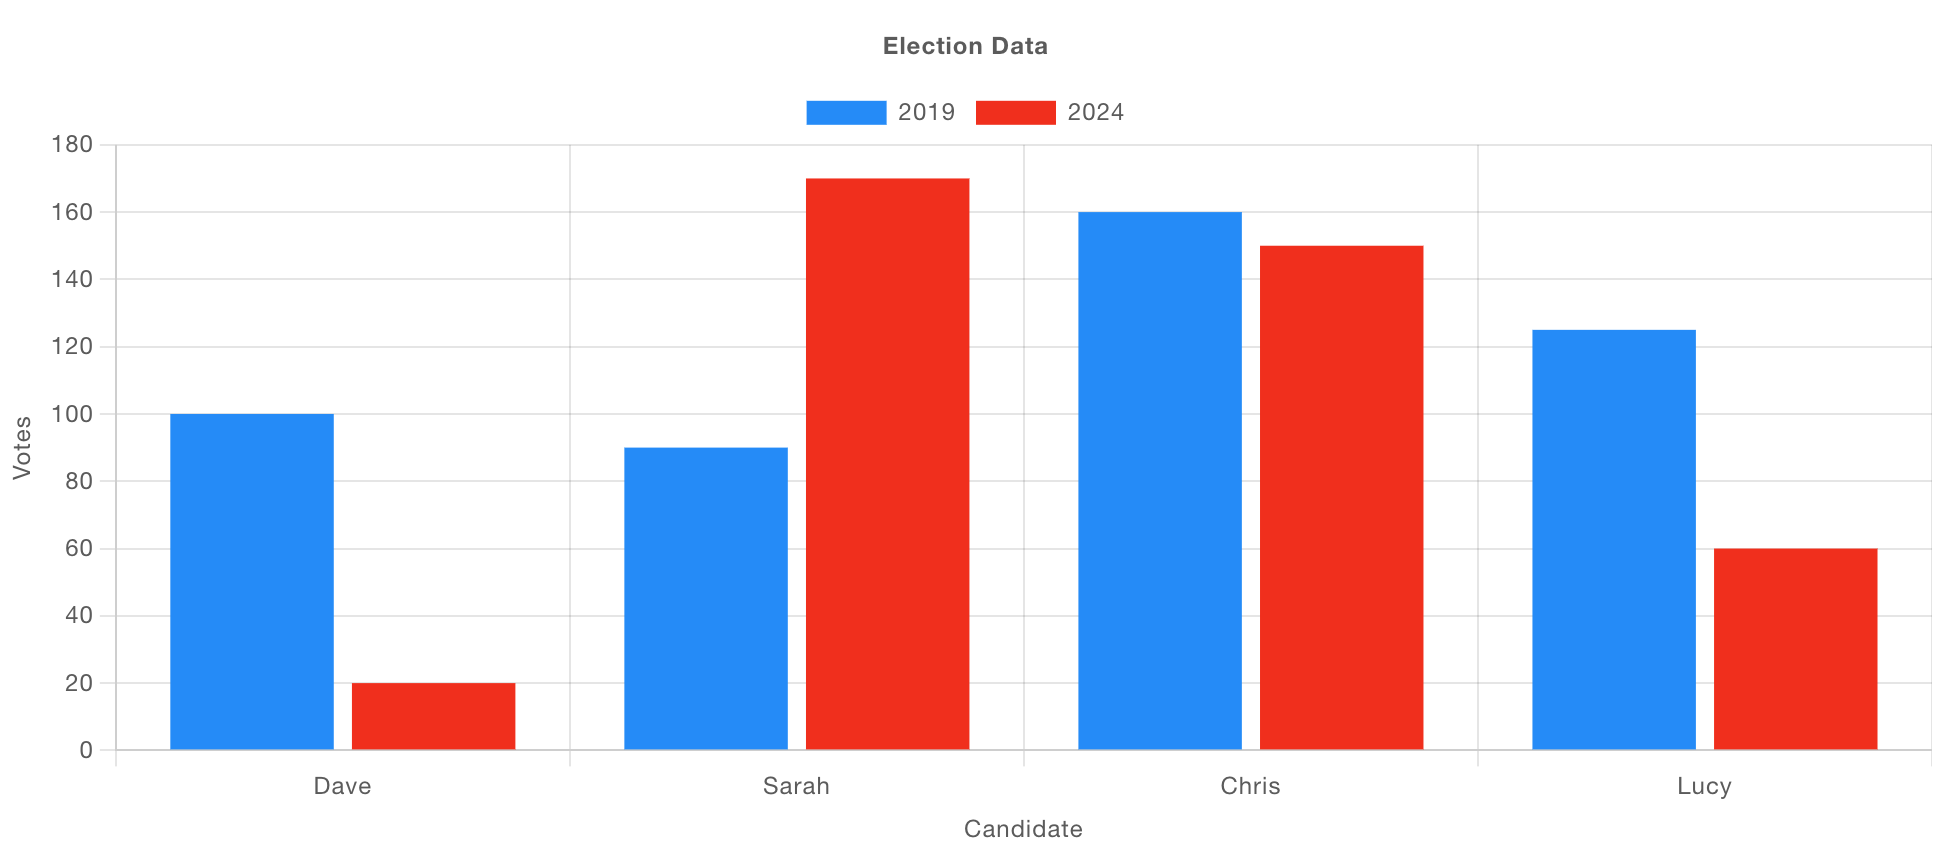 Example of a bar chart showing election data, grouped by candidate, and a series for each year